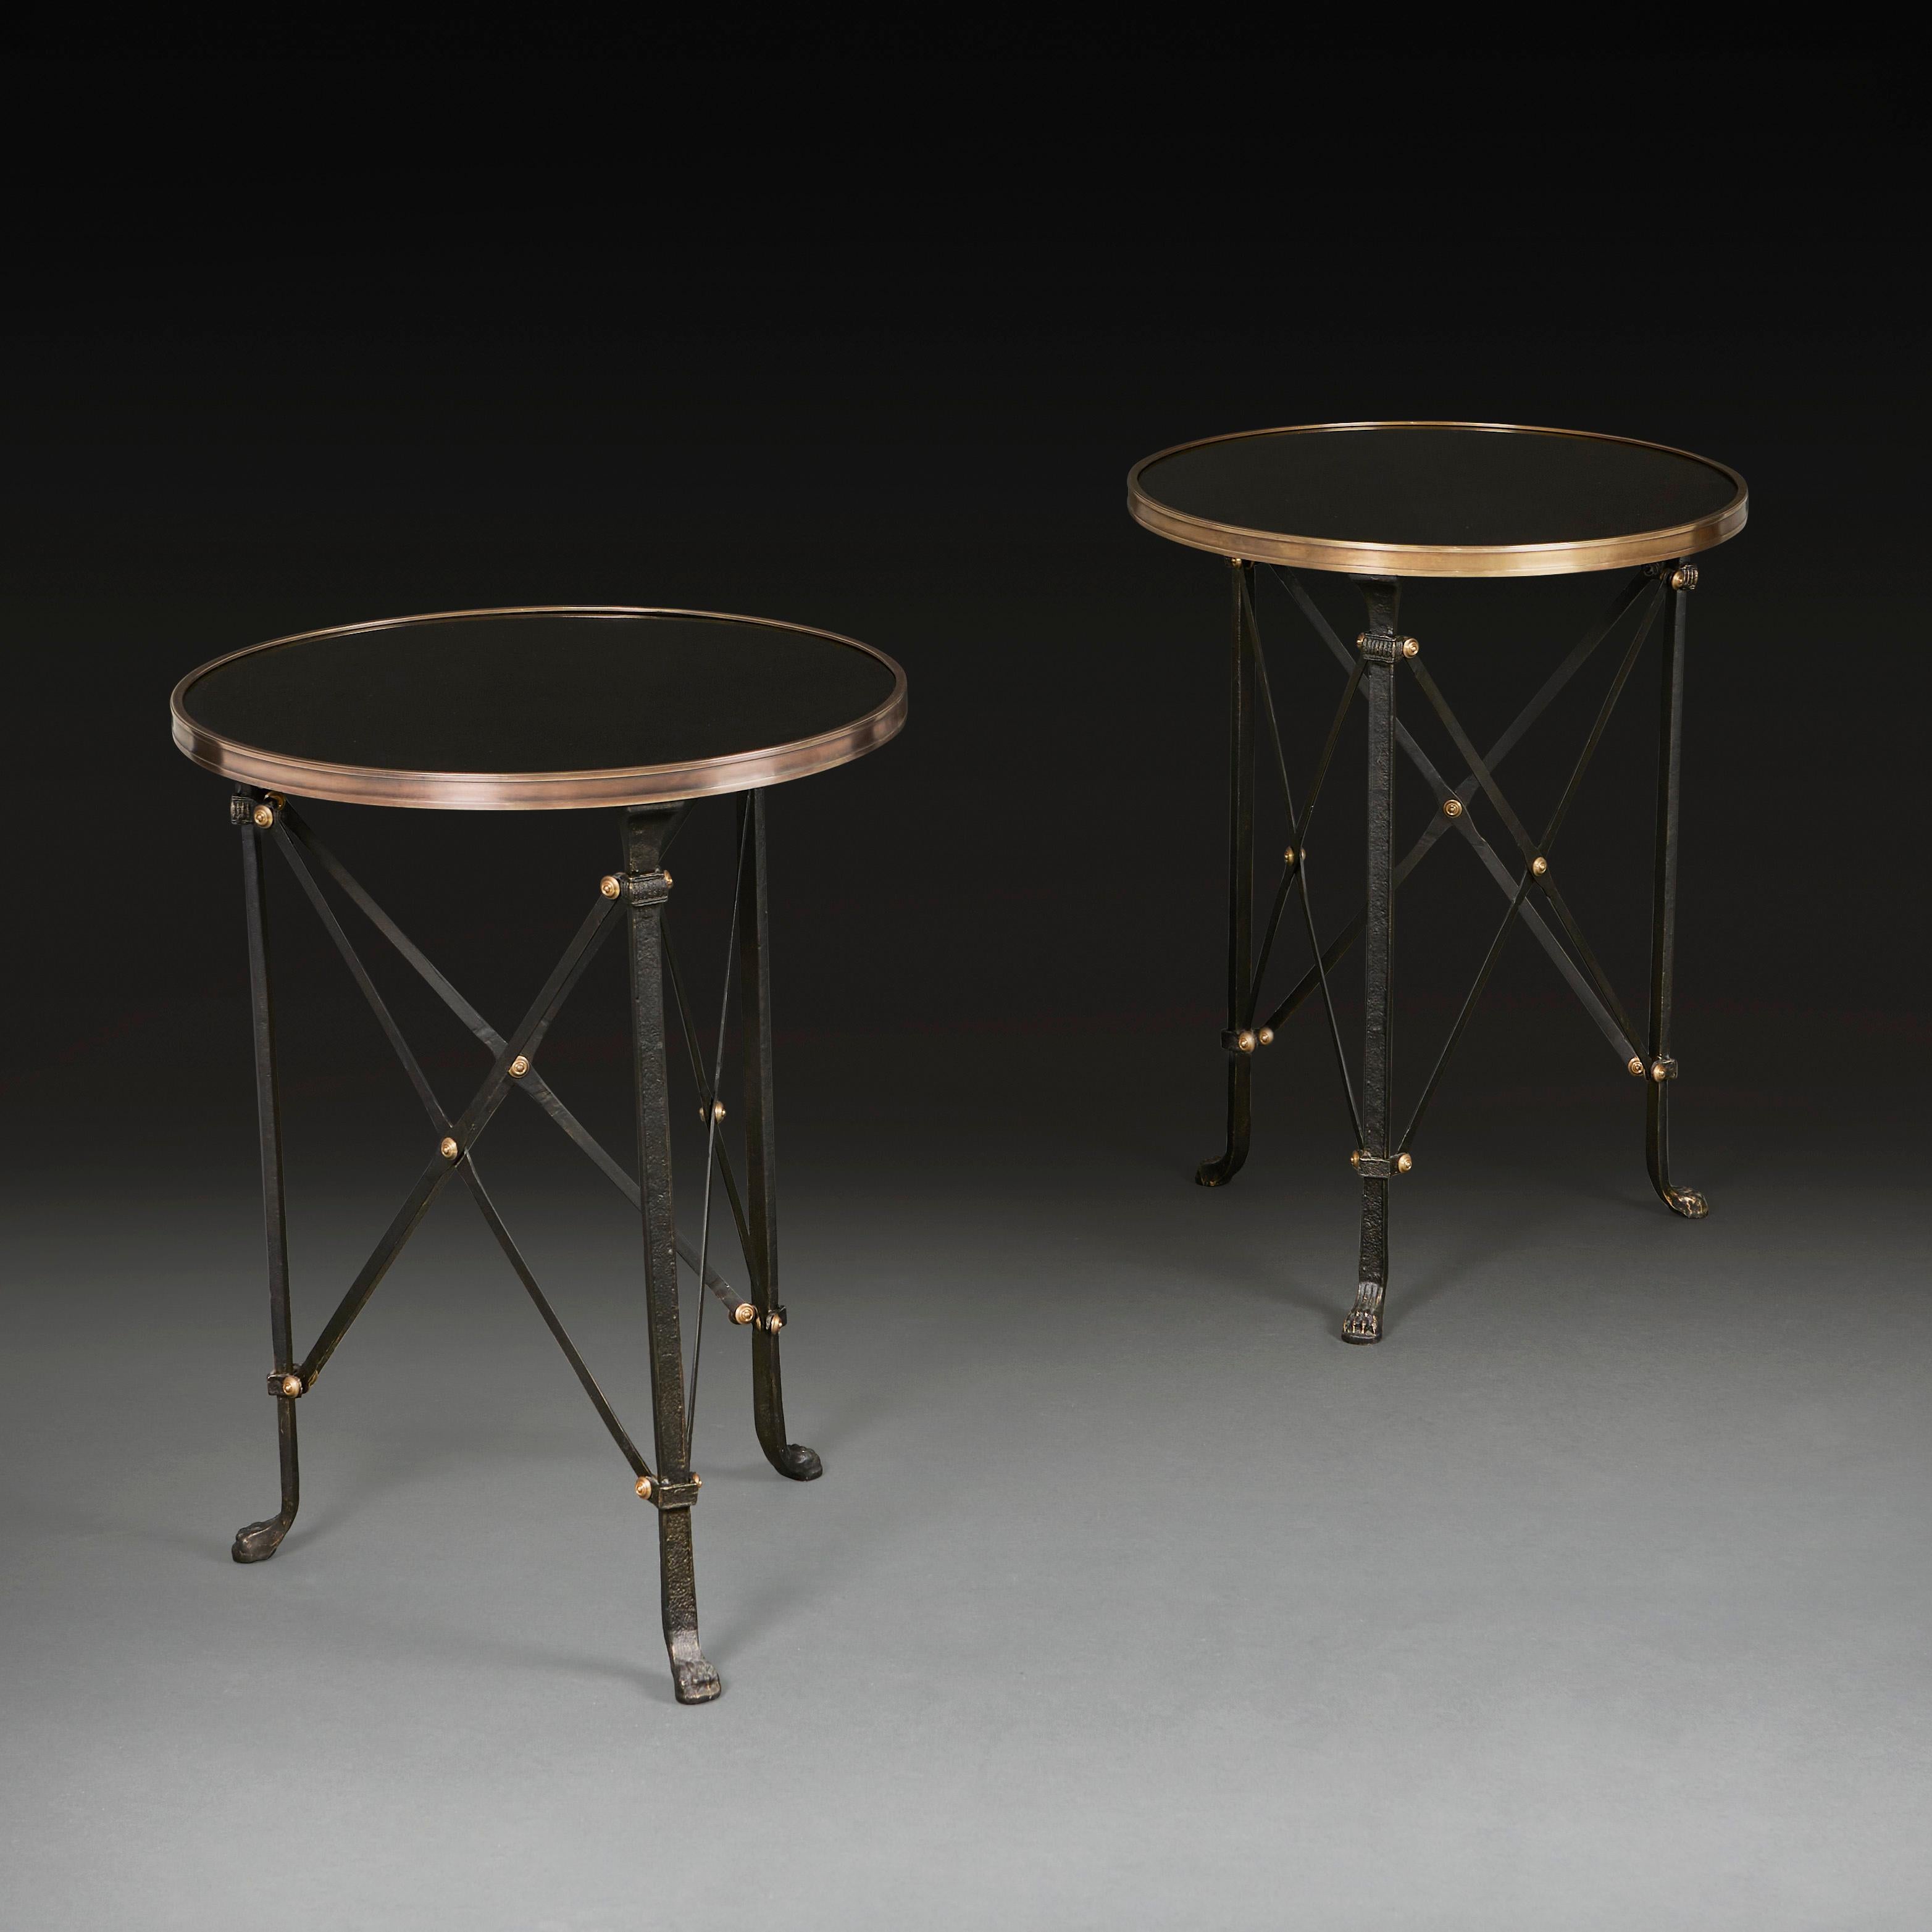 France, 20th century

A pair of mid twentieth century Empire style circular gueridon,  the black marble tops with polished brass rims, all supported on tripod bronze bases with cross stretchers and brass roundels, the legs terminating in hairy paw